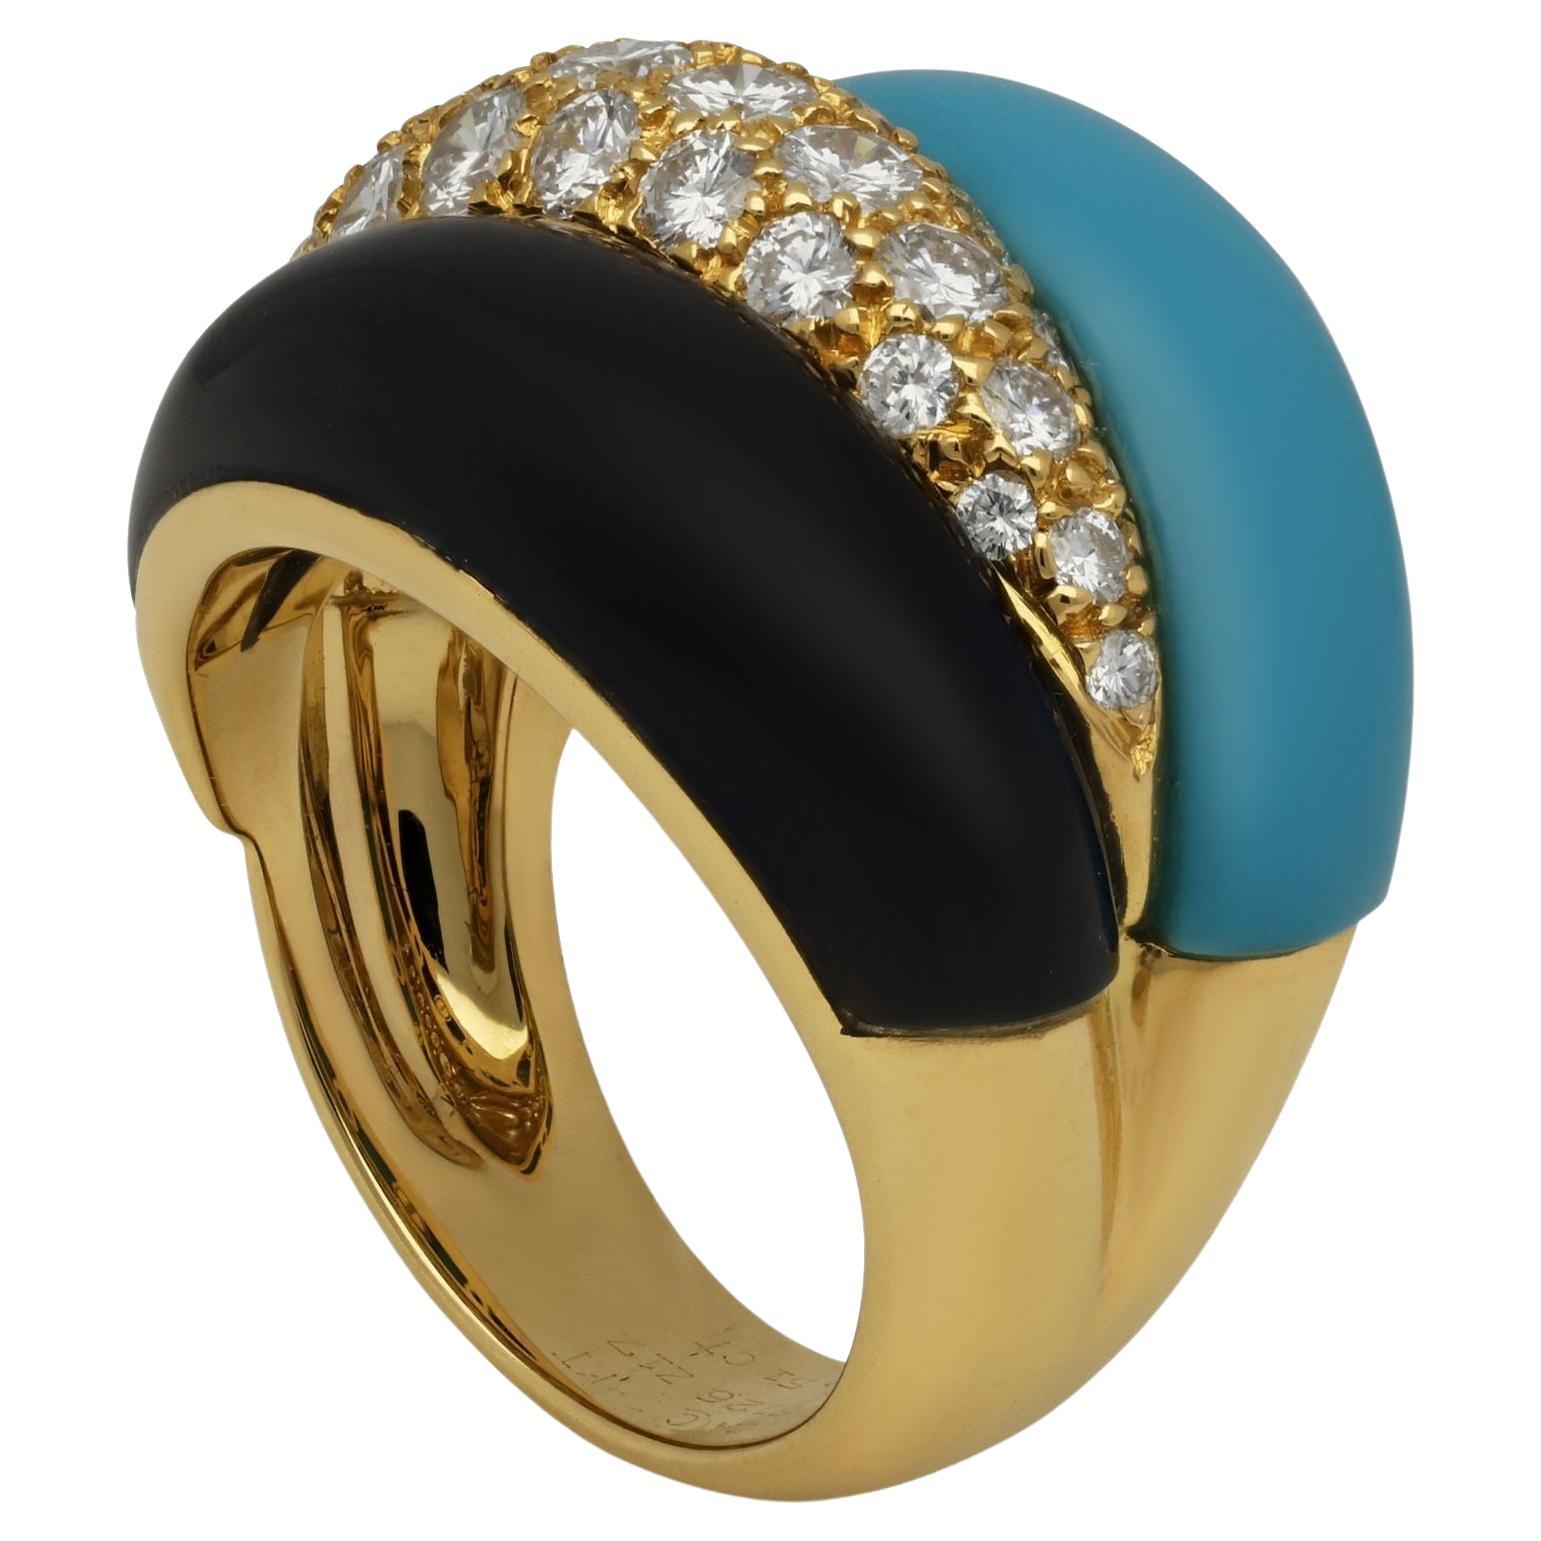 Van Cleef & Arpels Vintage Diamond, Turquoise and Onyx Dress Ring, circa 1990s For Sale